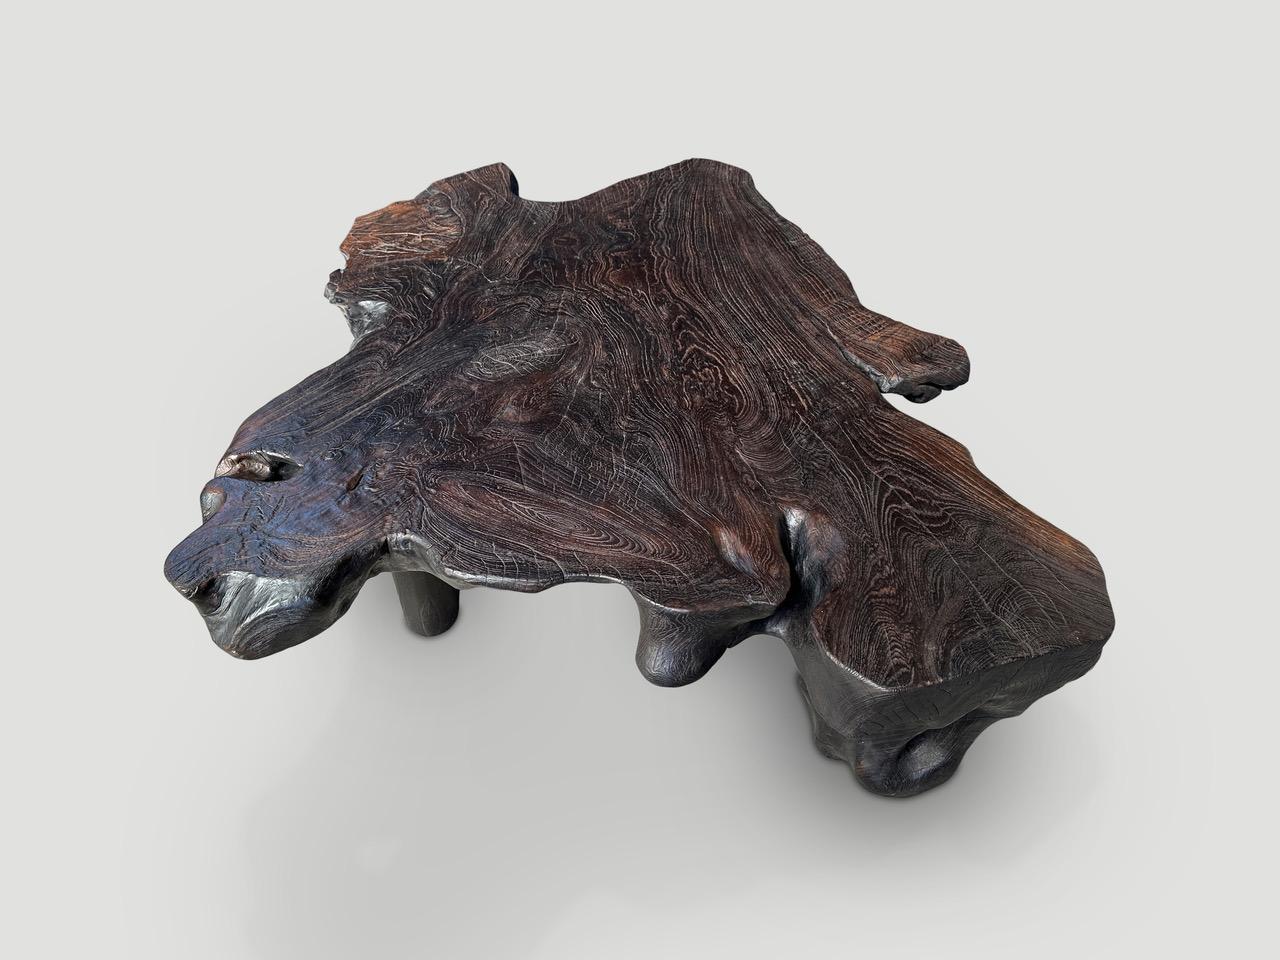 Natural organic formed reclaimed teak root coffee table. We added two cone style legs to level out this otherwise single slab. Charred to a rich chocolate brown. Finally we rubbed the top with a wire brush revealing the beautiful wood grain. It’s